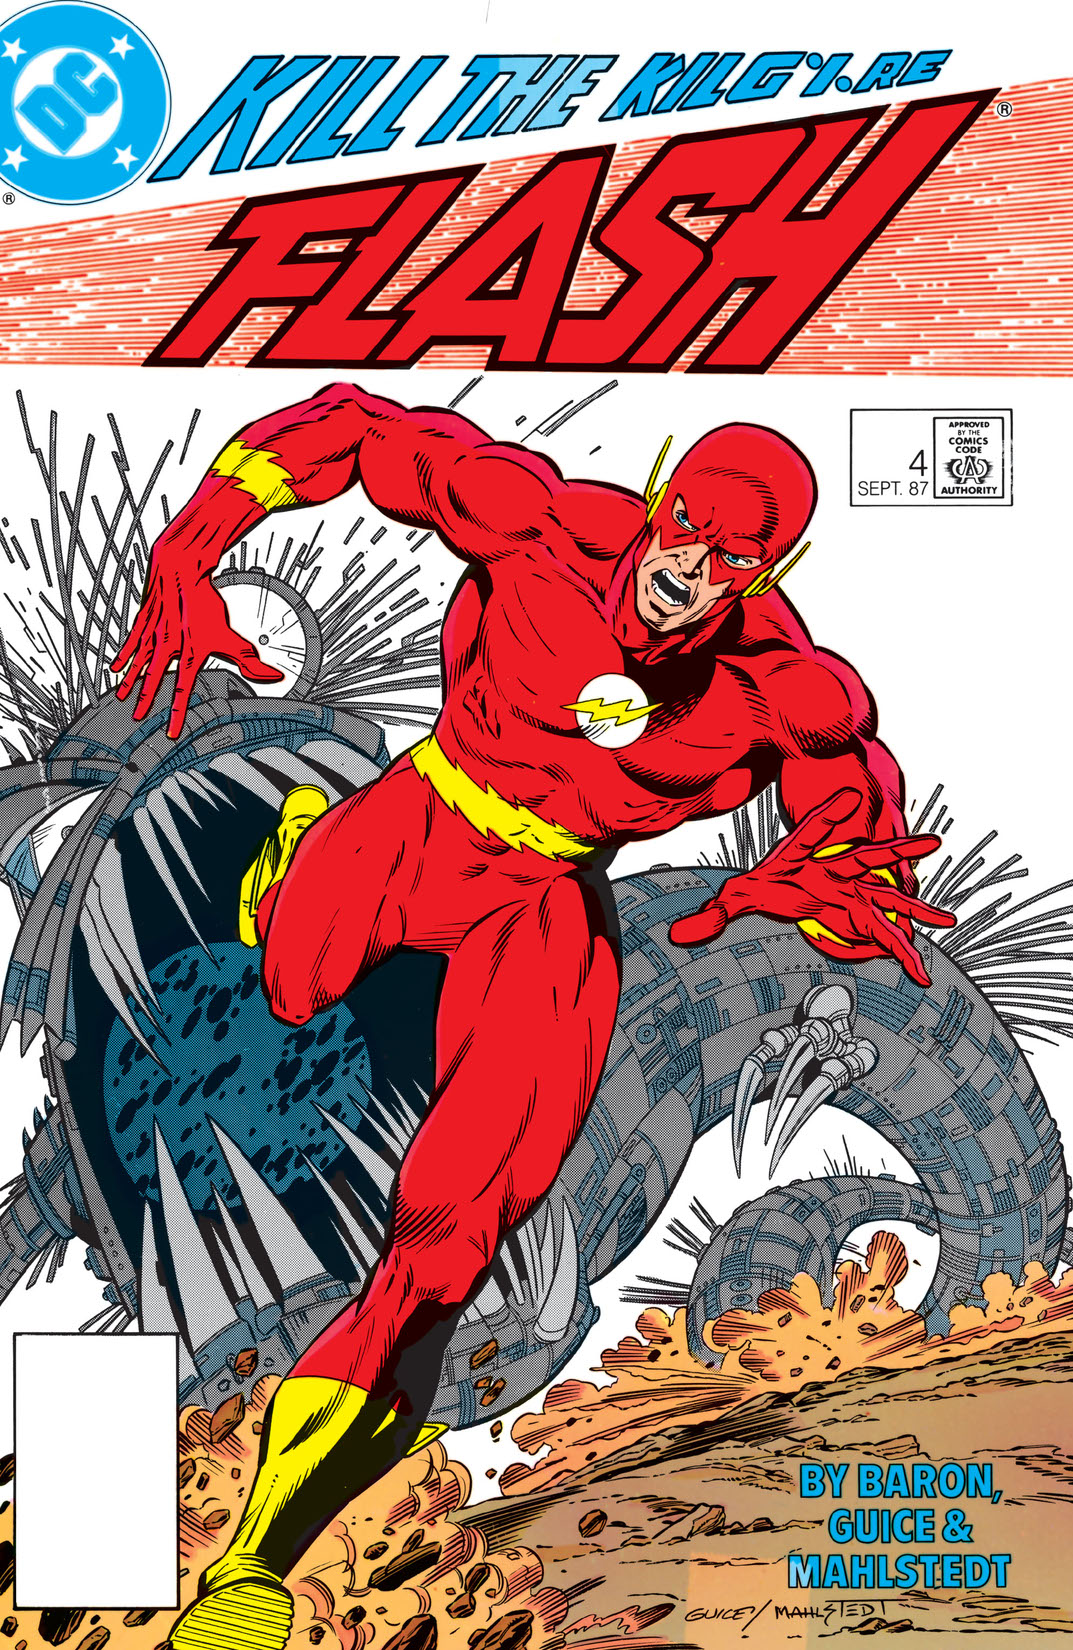 The Flash (1987-2008) #4 preview images